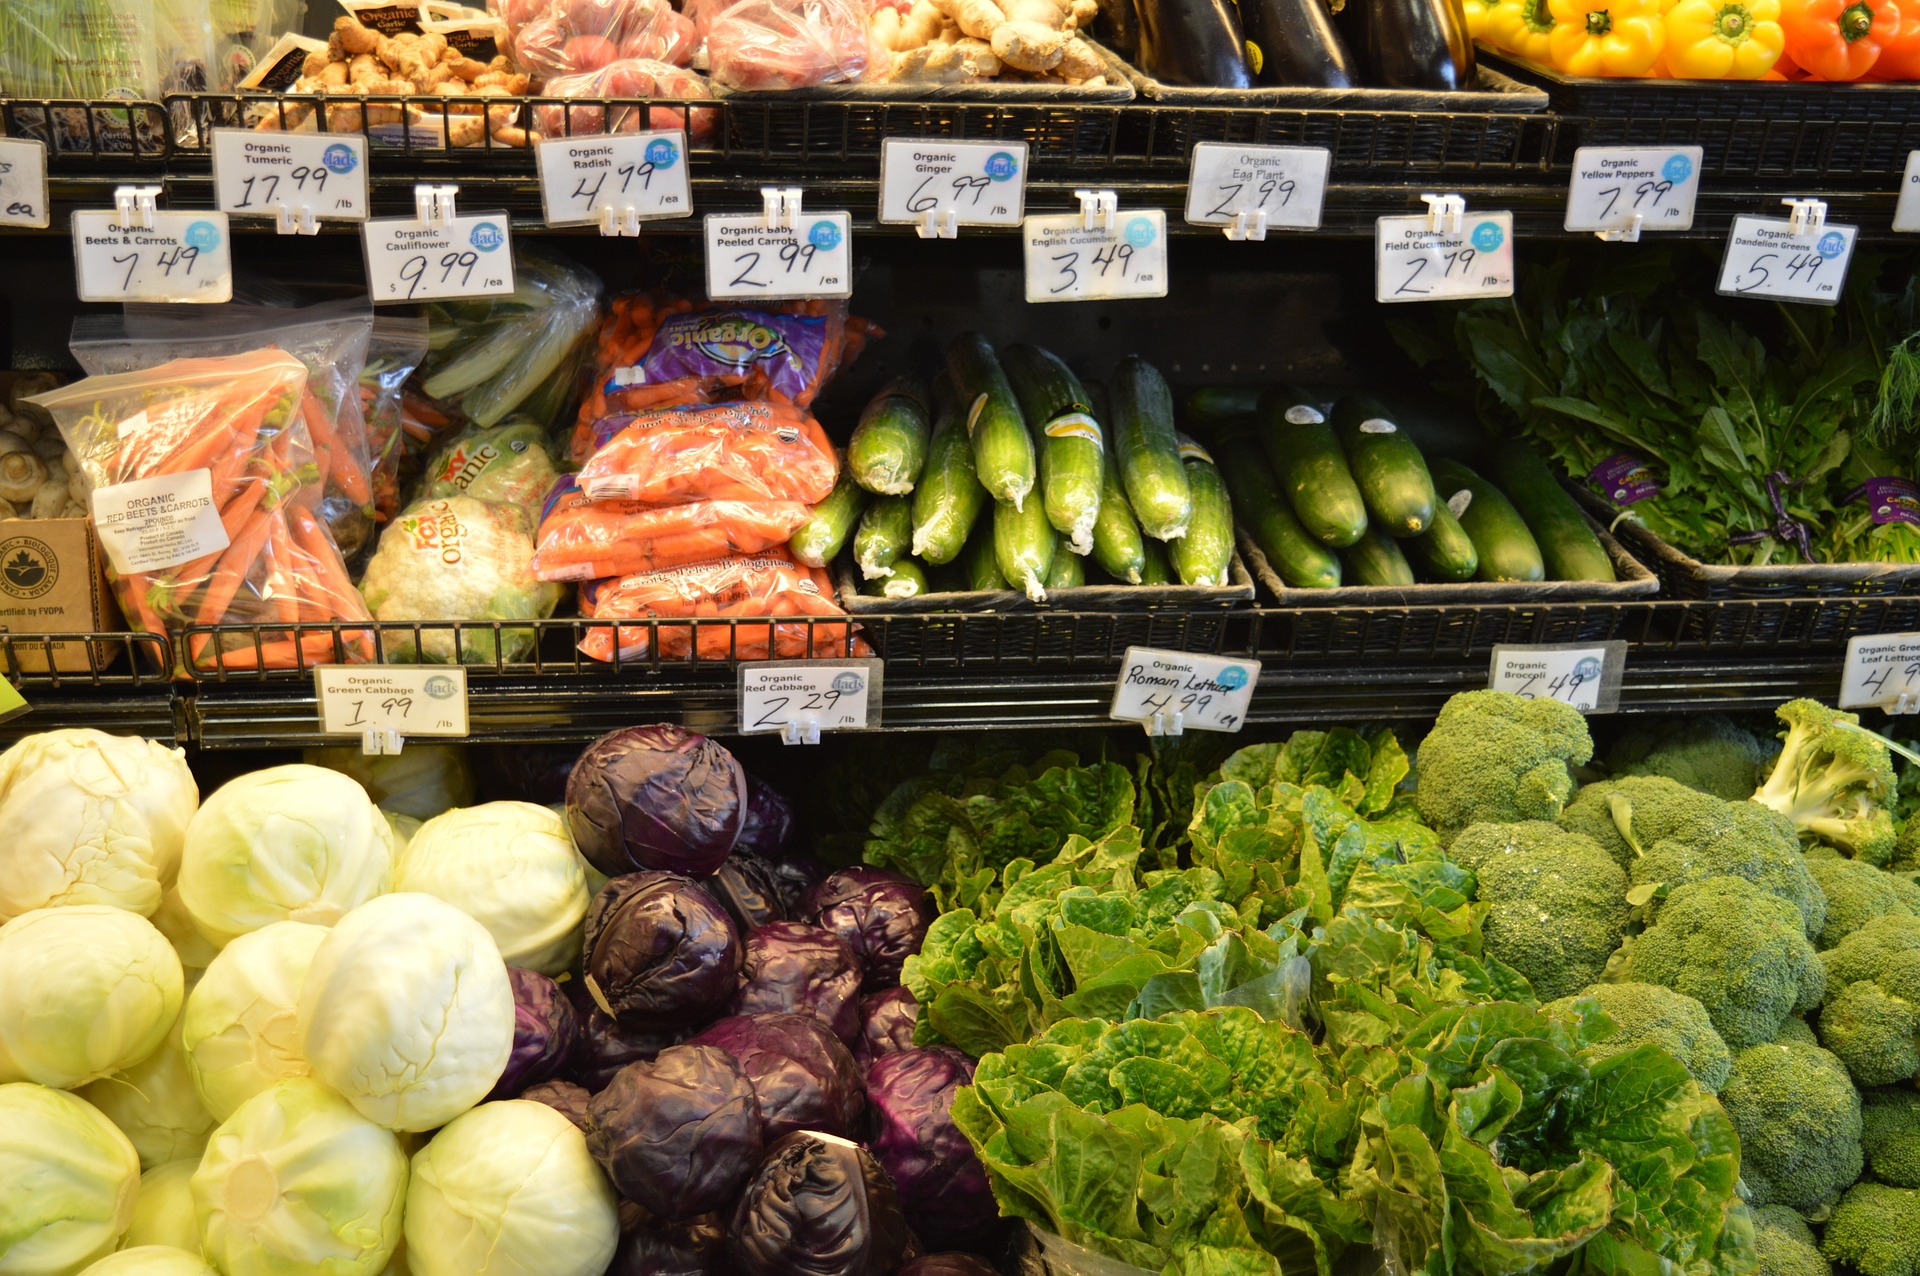 Imported Produce Driving Up Canadians’ Grocery Bills: 2020 Food Price Report